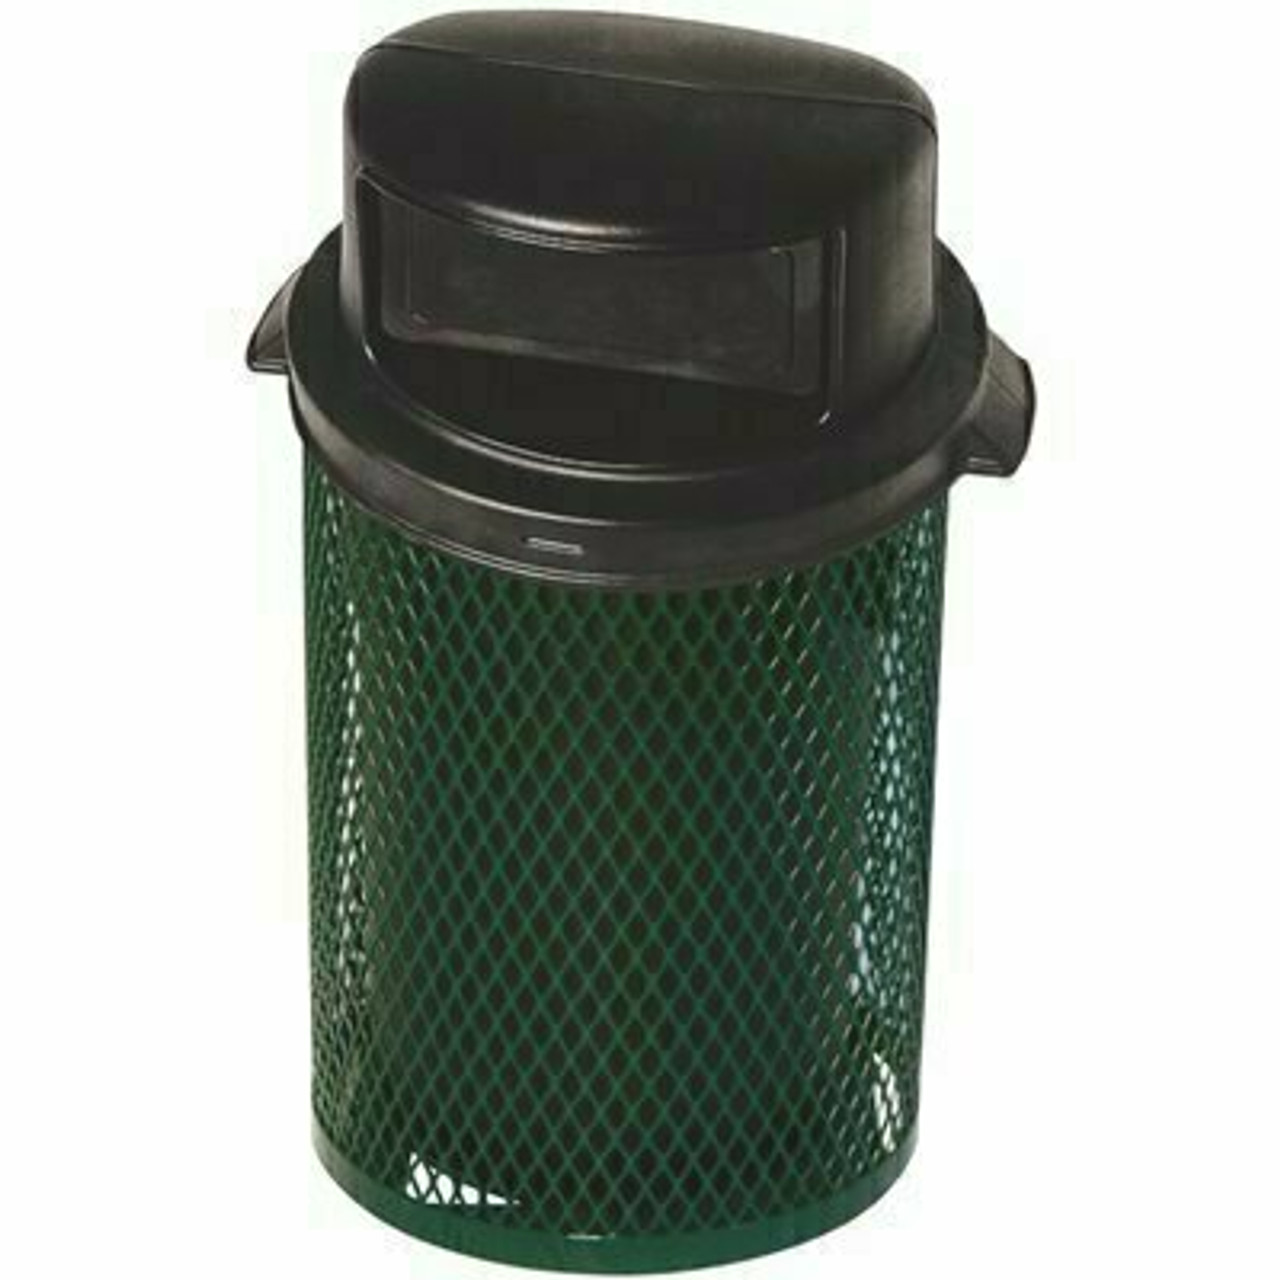 Everest 55 Gal. Green Trash Receptacle With Square Plastic Dome Top